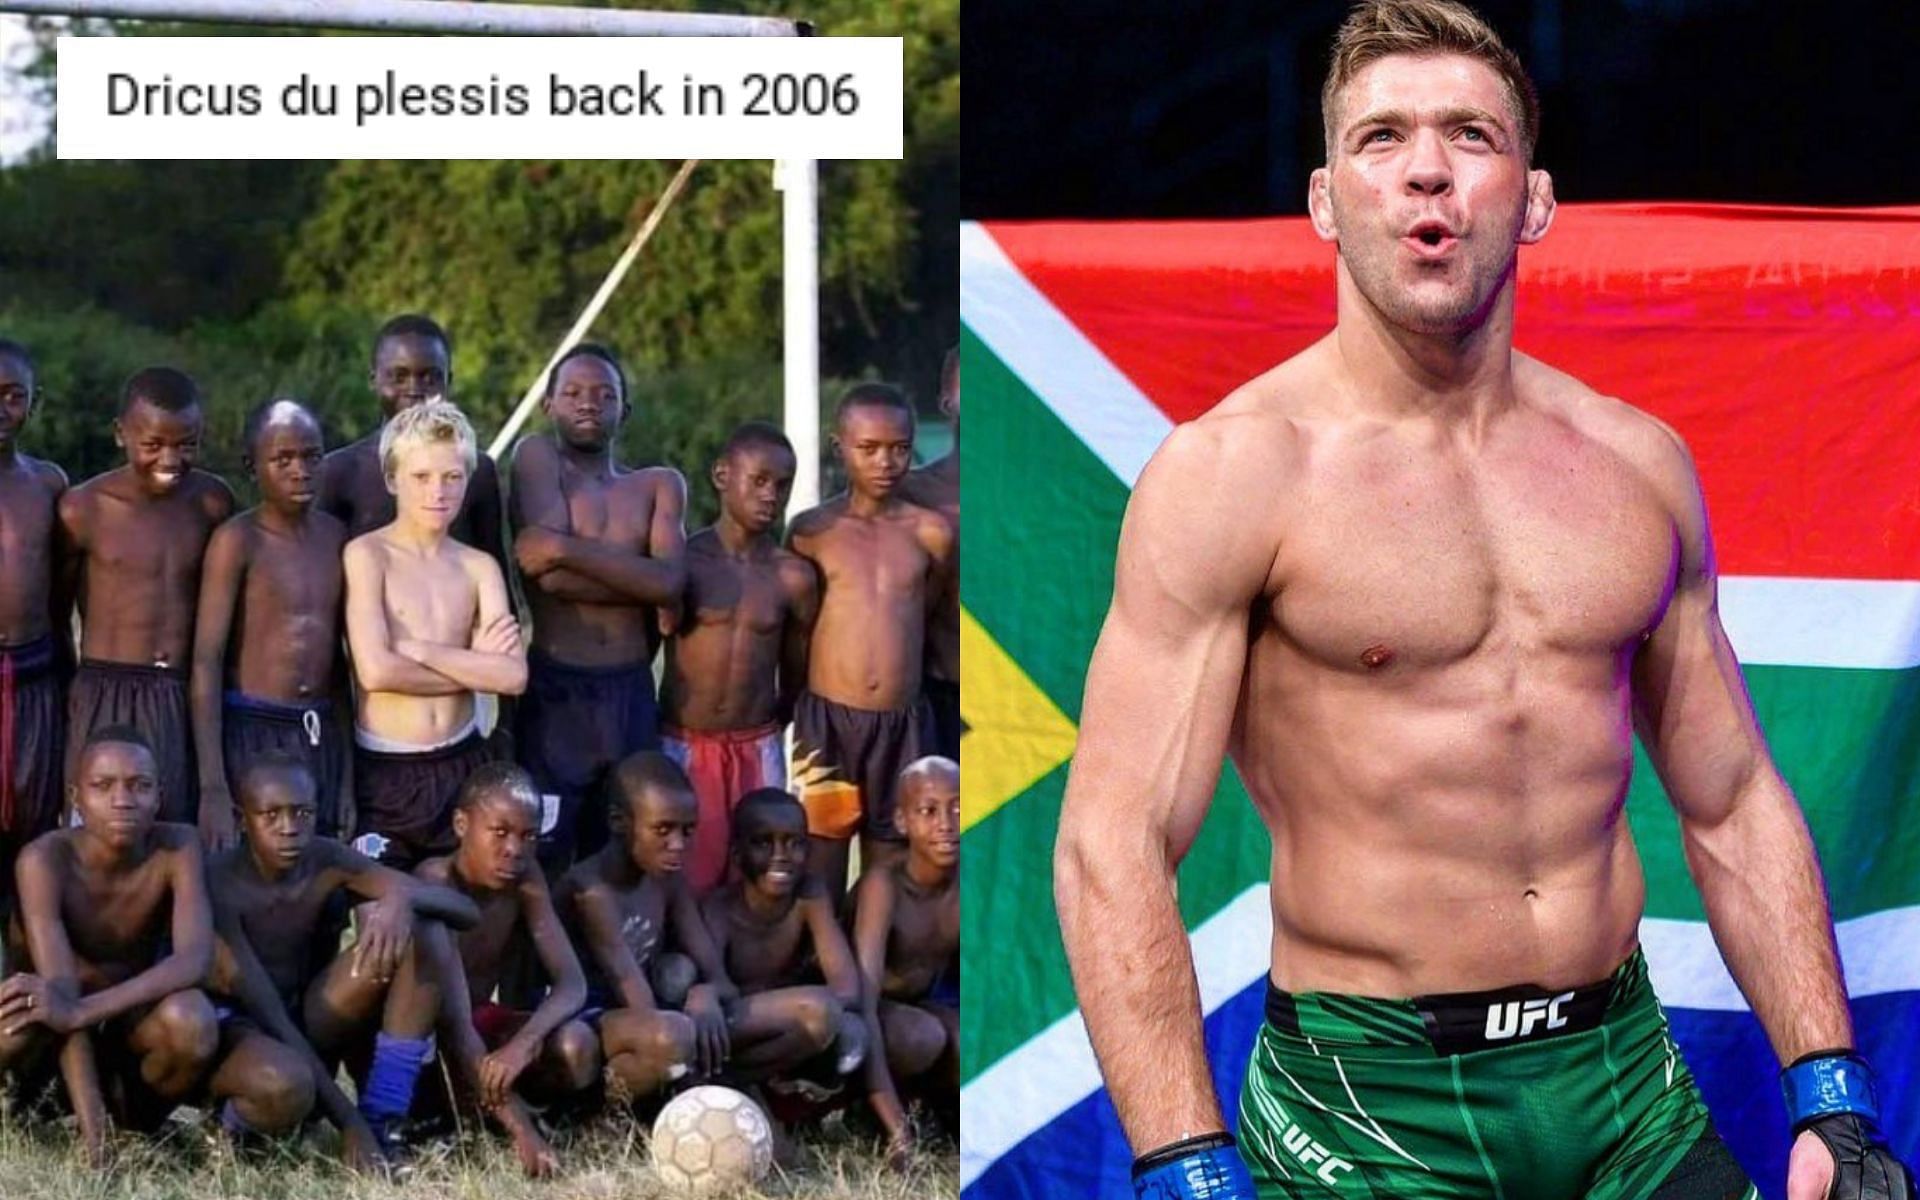 Dricus du Plessis (right) [Images courtesy of @dricusduplessis on Instagram]